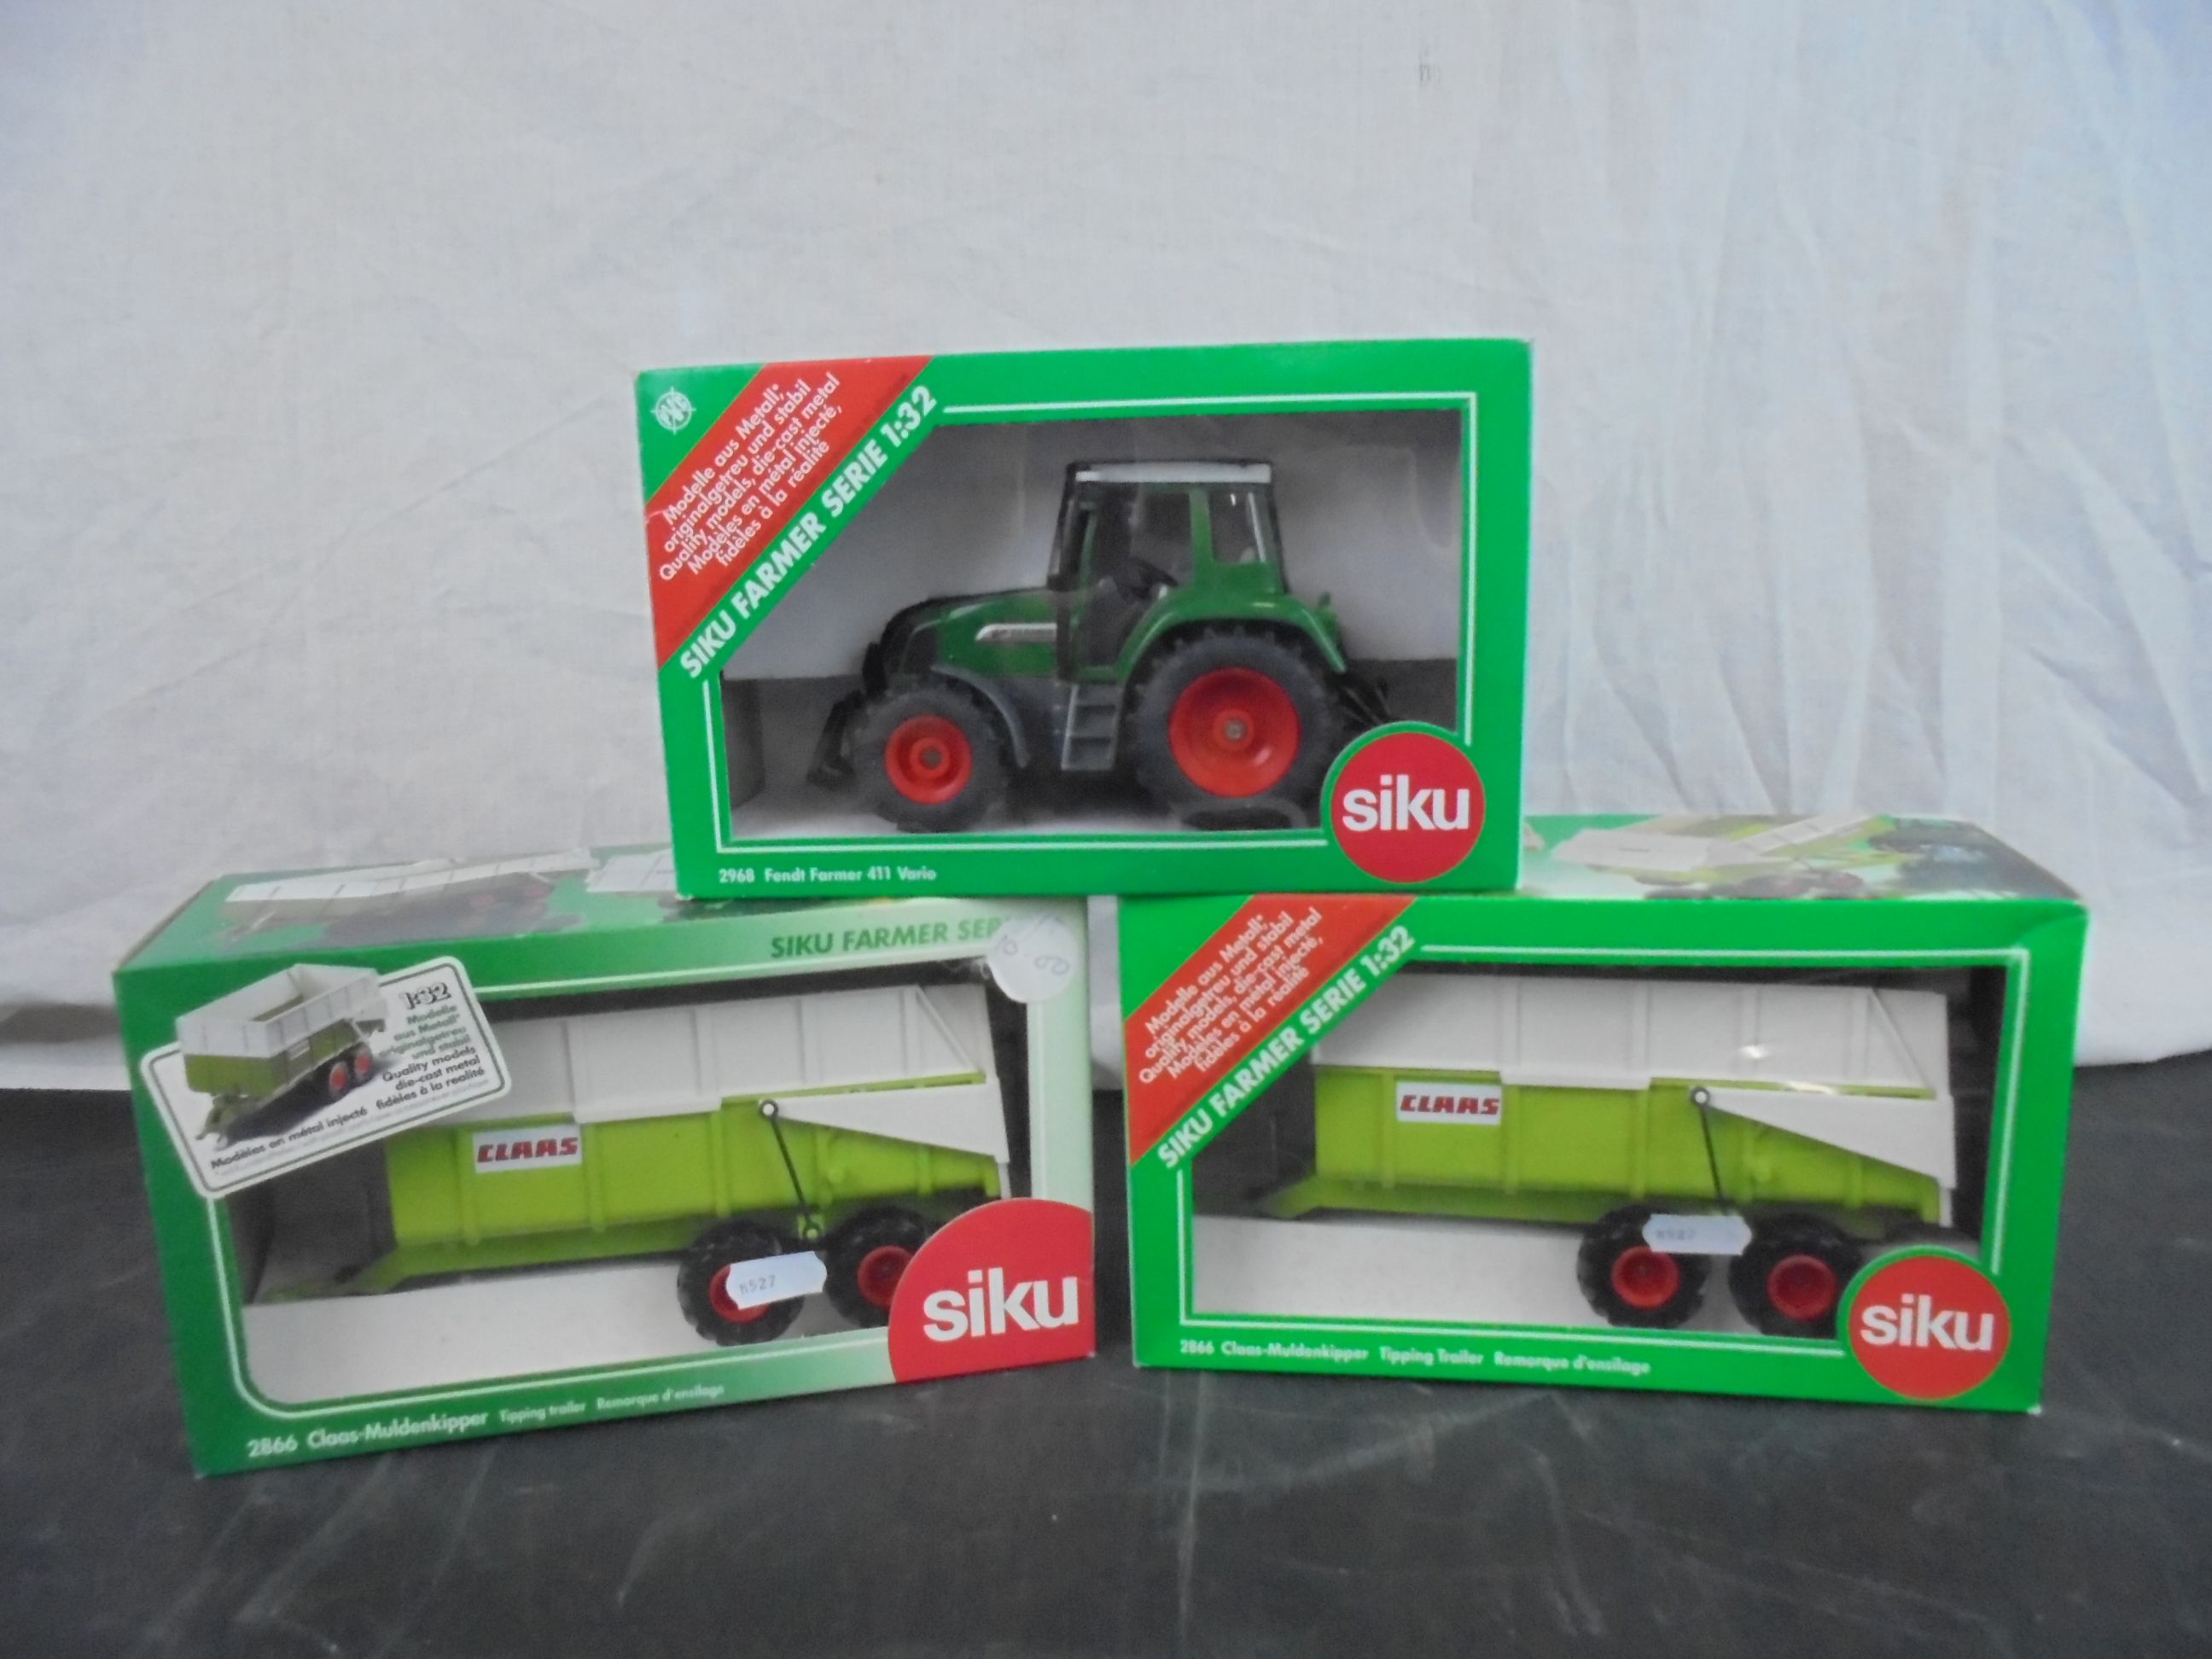 11 Boxed Siku 1/32 farming models, mainly tractors, to include 3254 x 2, 3258, 3263, 2965, 2968, - Image 4 of 5